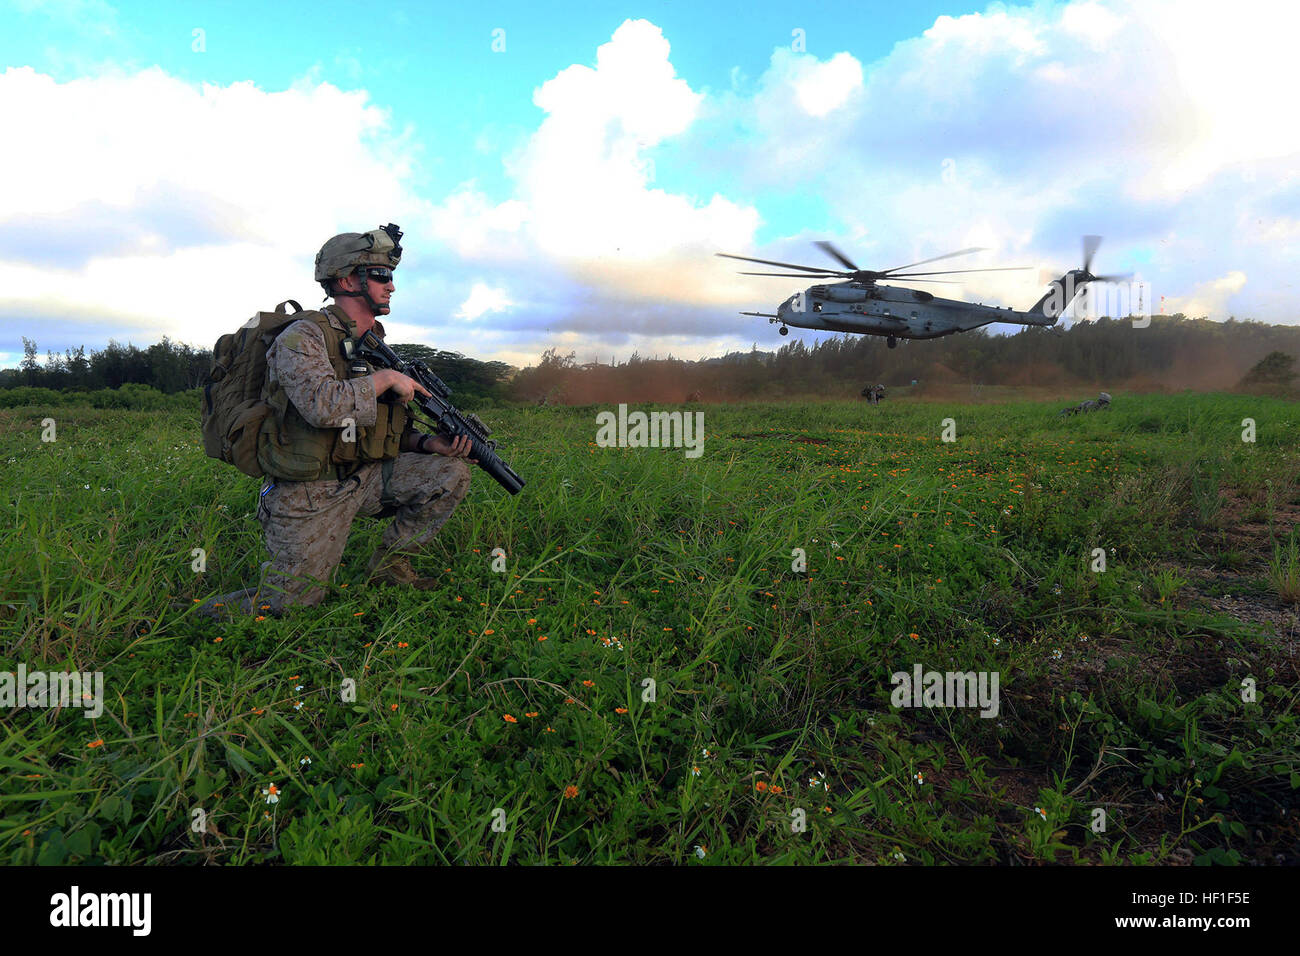 U.S. Marine Corps Cpl. Justin Bloomer, a squad leader with the 1st squadron, 81mm Platoon, TRAP Section, Weapons Company, Battalion Landing team 1/4, 13th Marine Expeditionary Unit, provides security while a CH-53E Super Stallion helicopter lands in the background to carry members of his team back to the USS Boxer (LHD-4) during Operation Tropic Thunder on the Island of Oahu, Hawaii, Aug. 31, 2013. (DoD photo by SSgt. Matt Orr, U.S. Marine Corps/Released) 130831-M-MC013-0388 (9688968782) Stock Photo